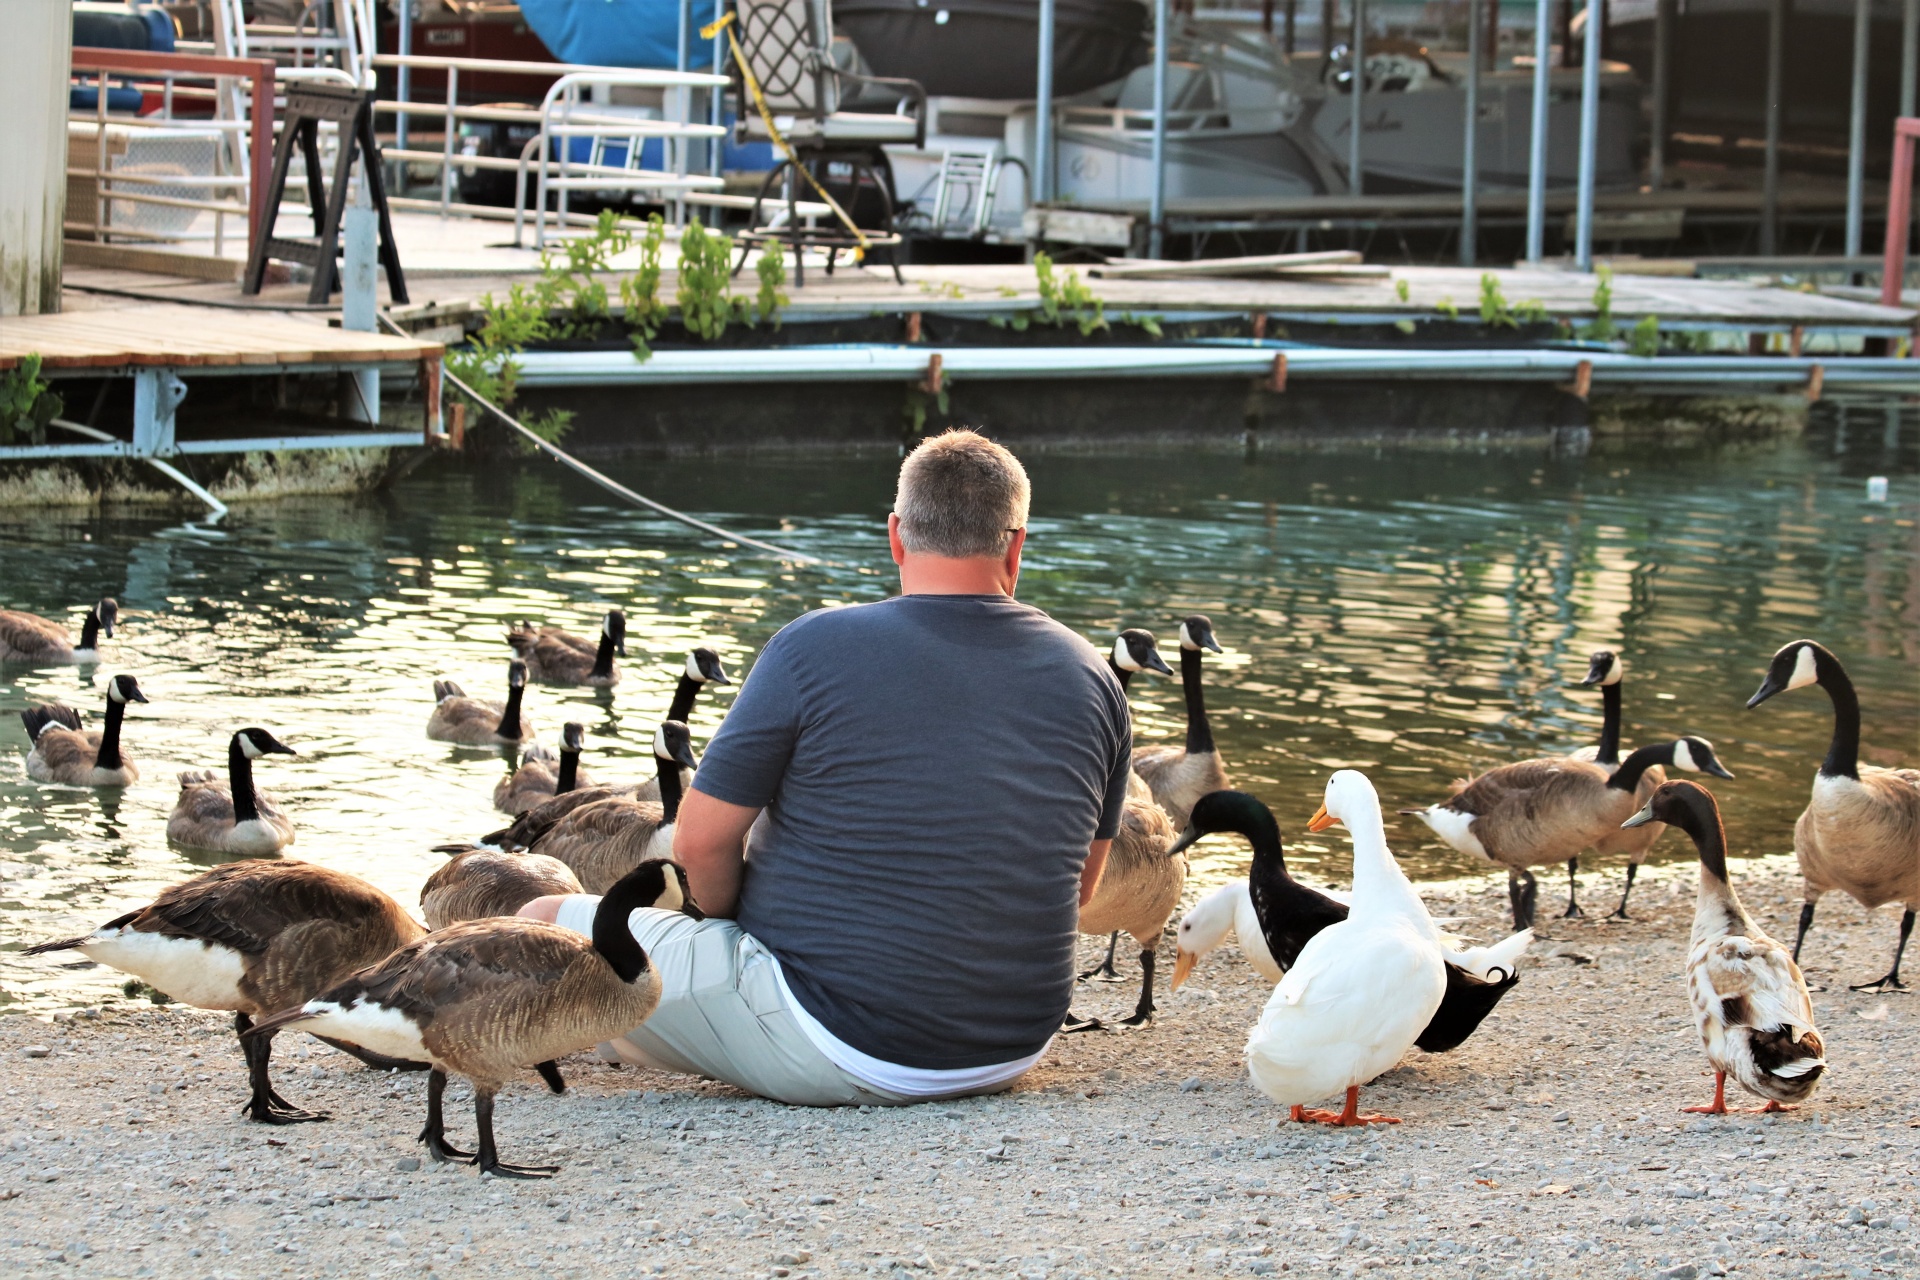 A man, sitting on the shore of a marina, feeding ducks and geese.